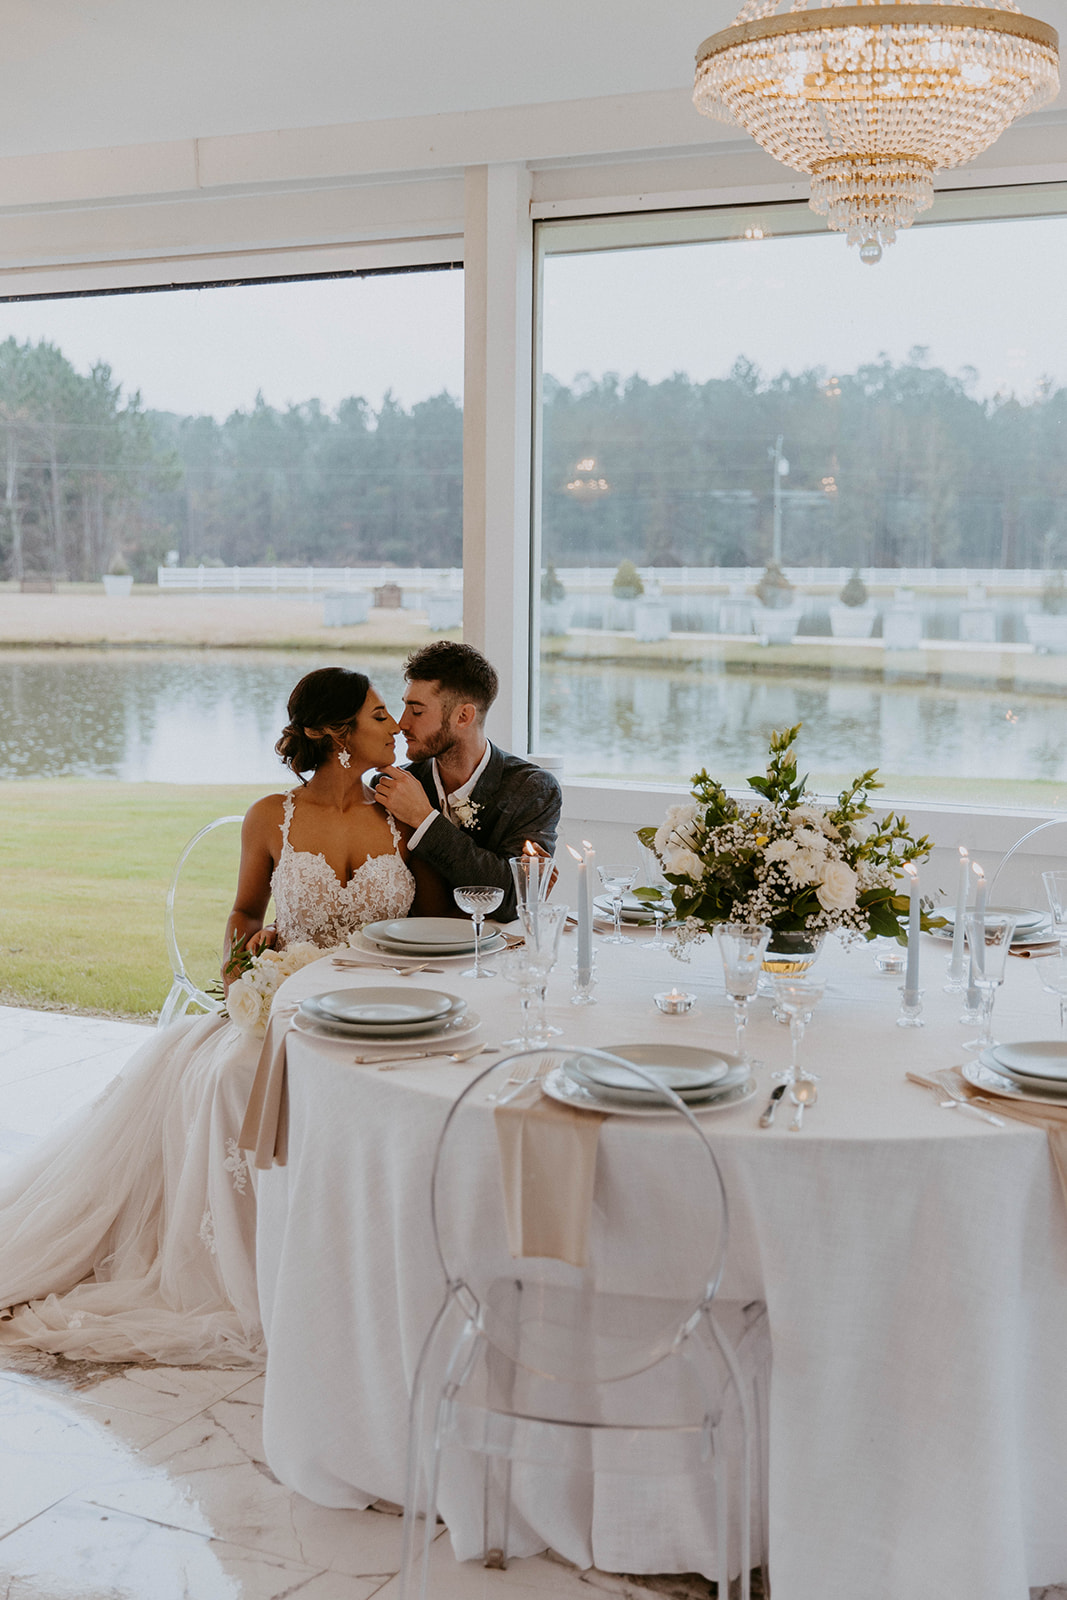 Bride and groom sitting at a dining table, sharing a kiss, with a scenic view of a lake through large windows in the background at Chateau 1800